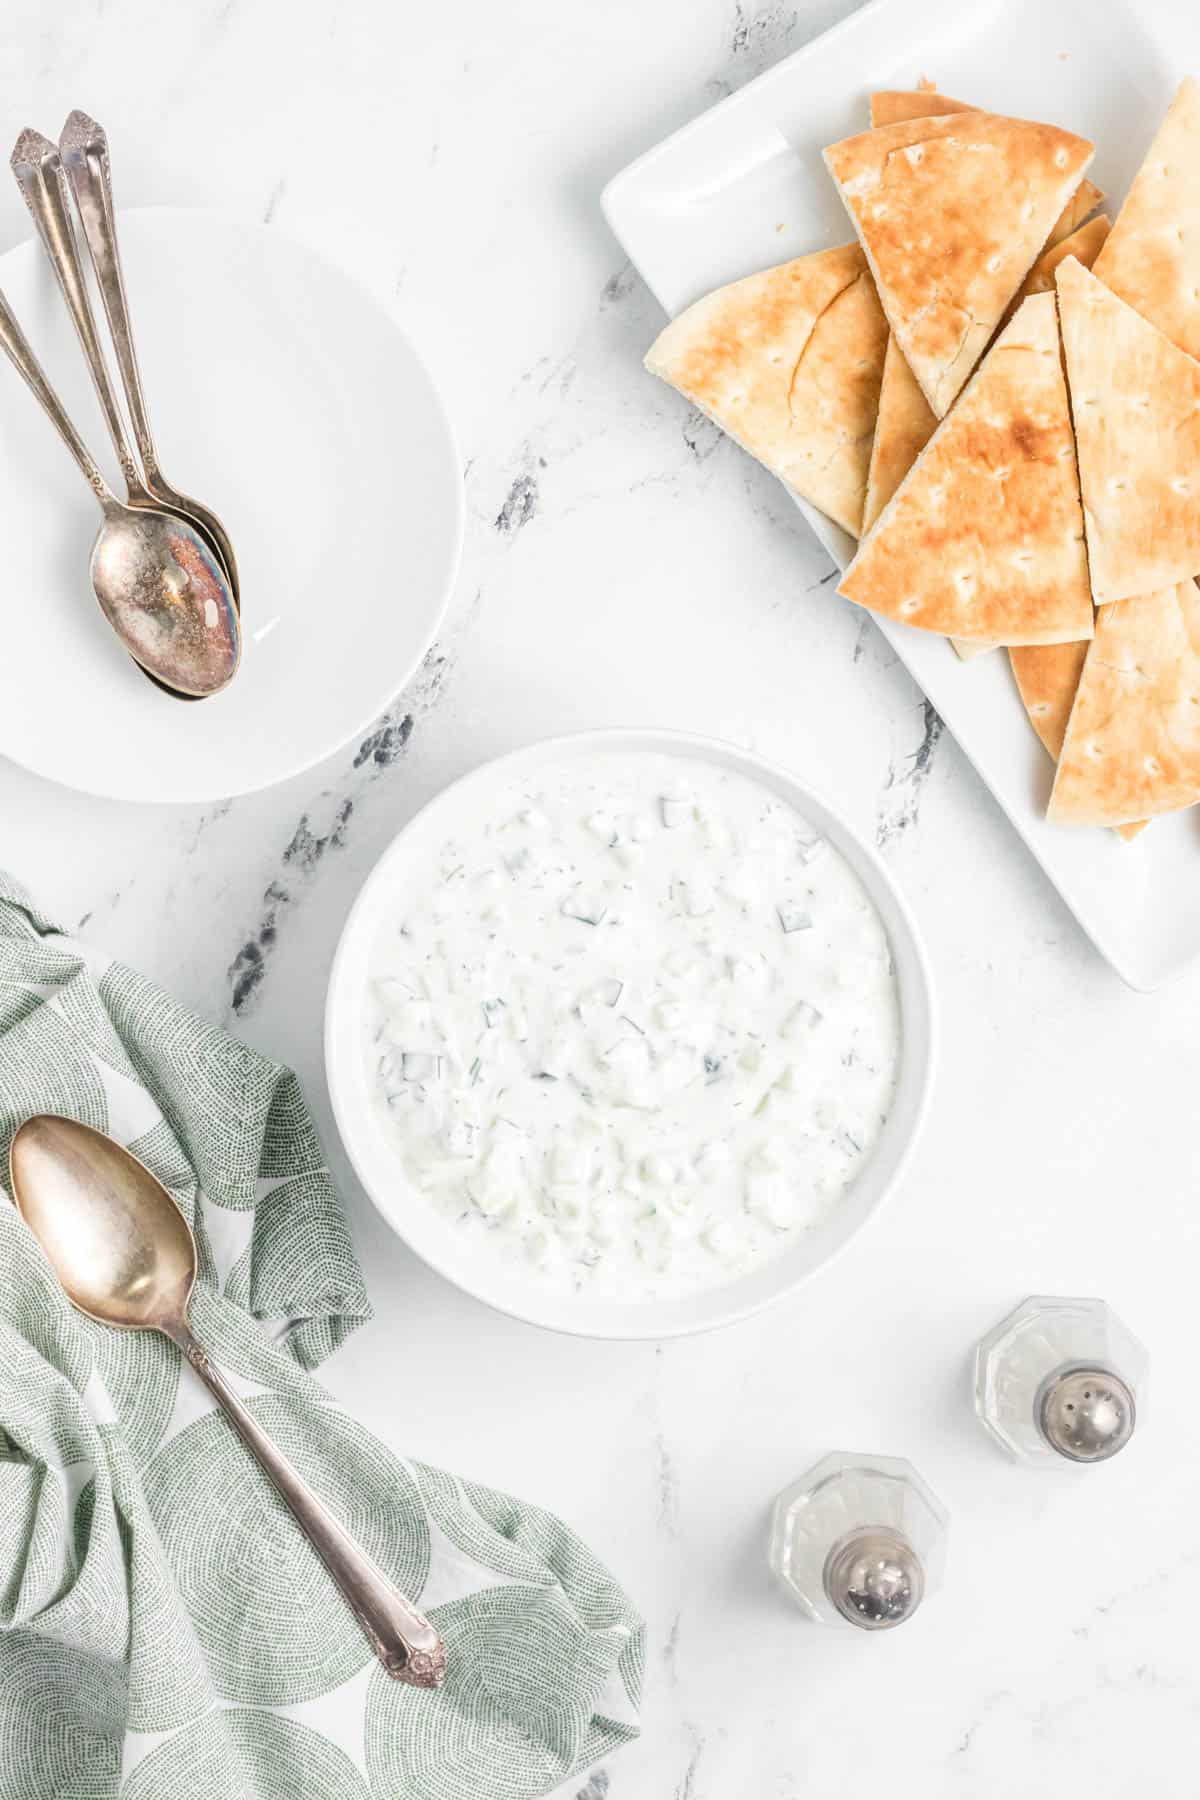 A bowl of tzatziki sauce next to a plate of pita bread cut into triangles.